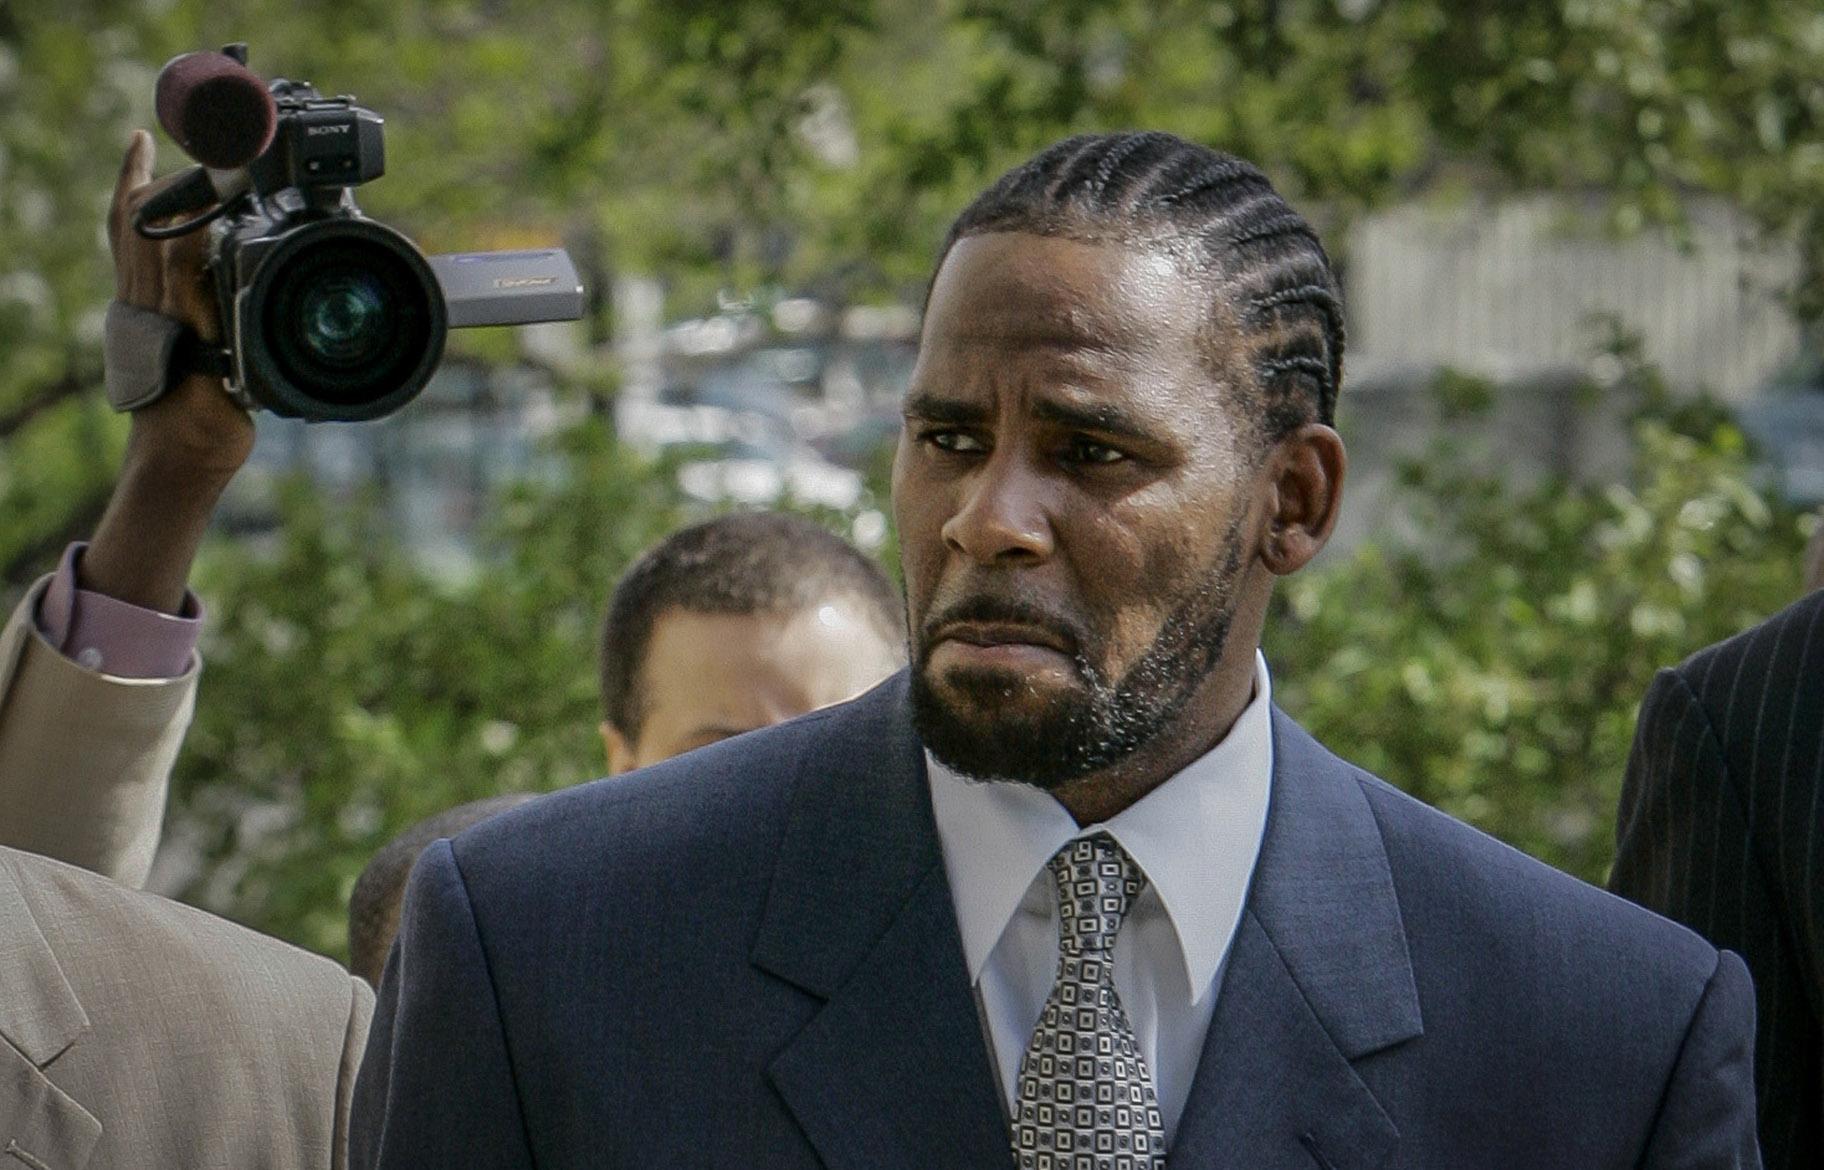 This photo from Friday May 9, 2008, shows R. Kelly arriving for the first day of jury selection in his child pornography trial at the Cook County Criminal Courthouse in Chicago. (AP Photo / Charles Rex Arbogast, File)